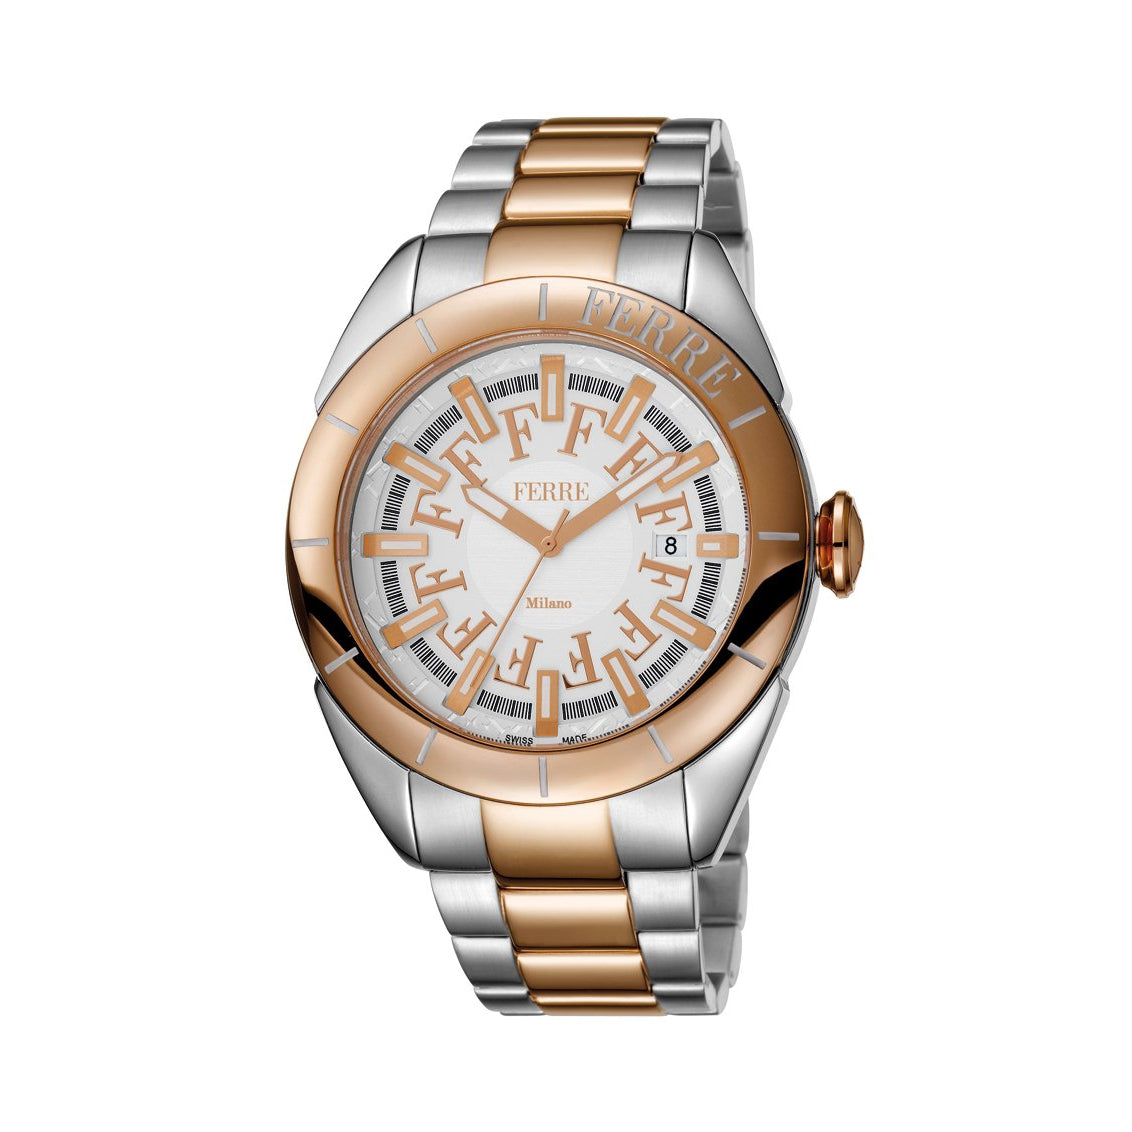 Amazon.com: Giorgio Milano Luxury Watches for Women - 'Giovanna'  Chronograph Ladies Watch with 44 MM Case - Japanese Quartz Movement -  Stainless Steel Band : Clothing, Shoes & Jewelry